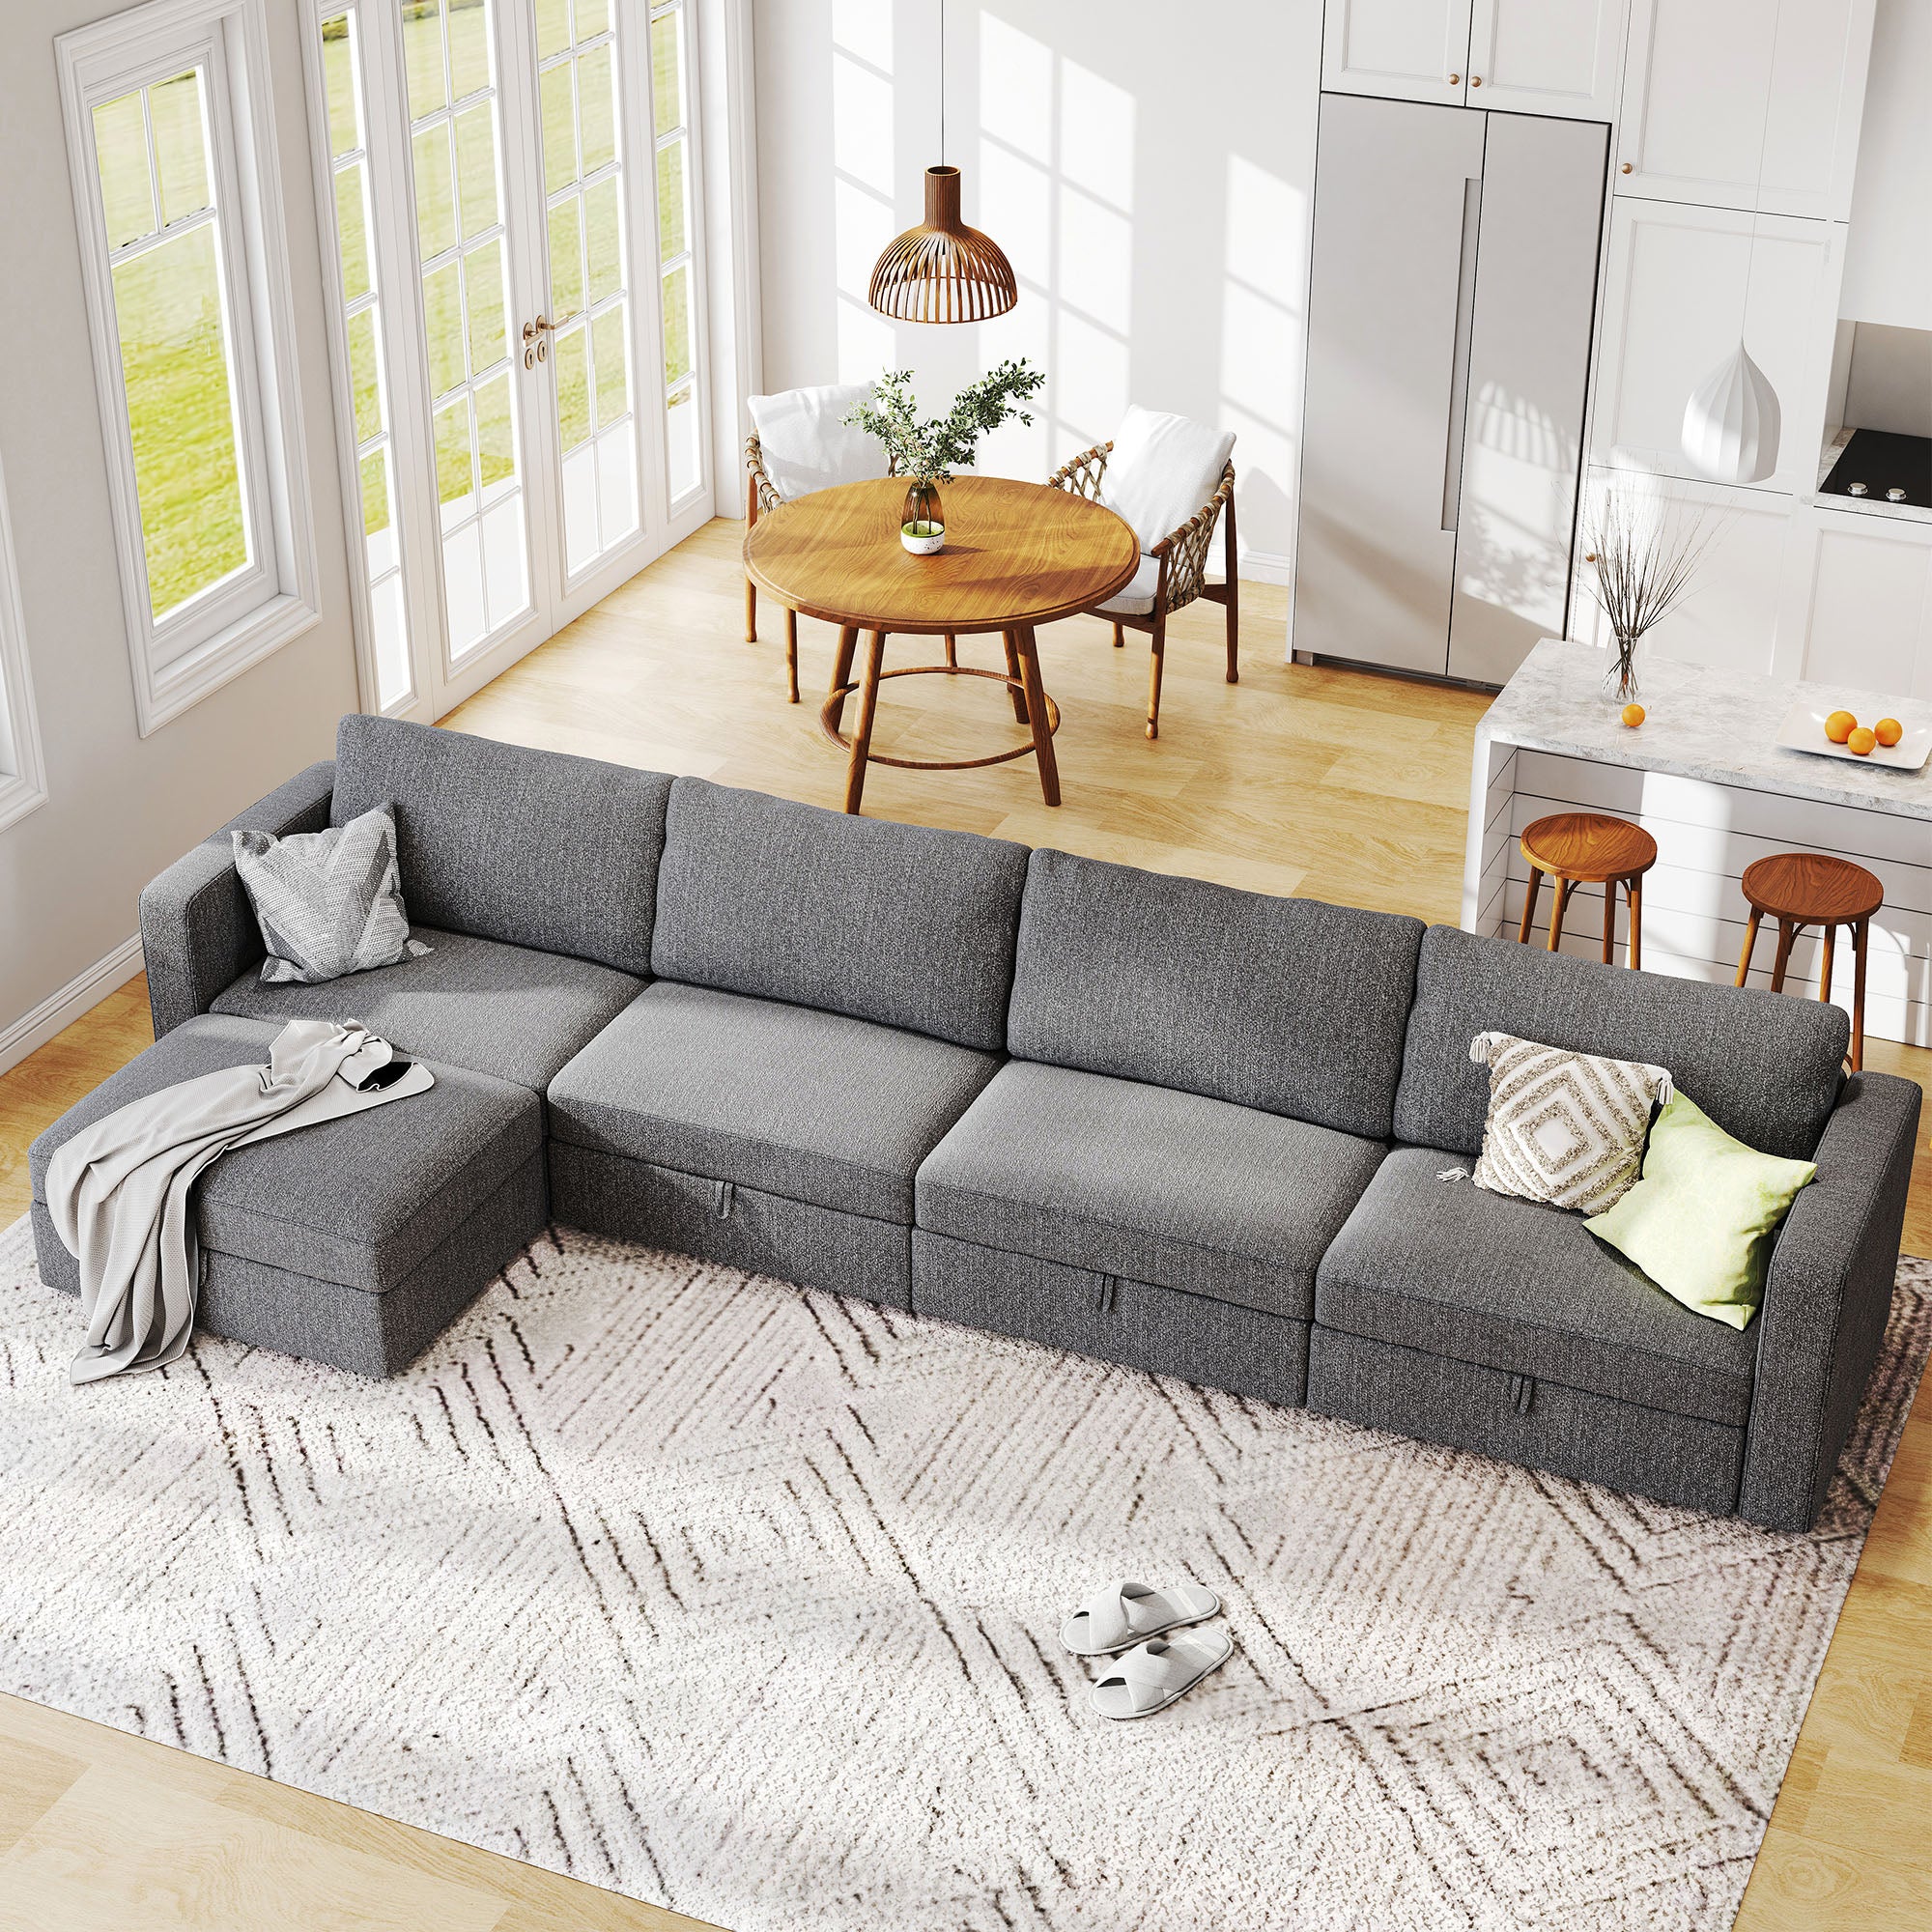 HONBAY Linen Grey Fabric Premuim 4 Seaters Modular Sectional Sofa with Convertible Chaise